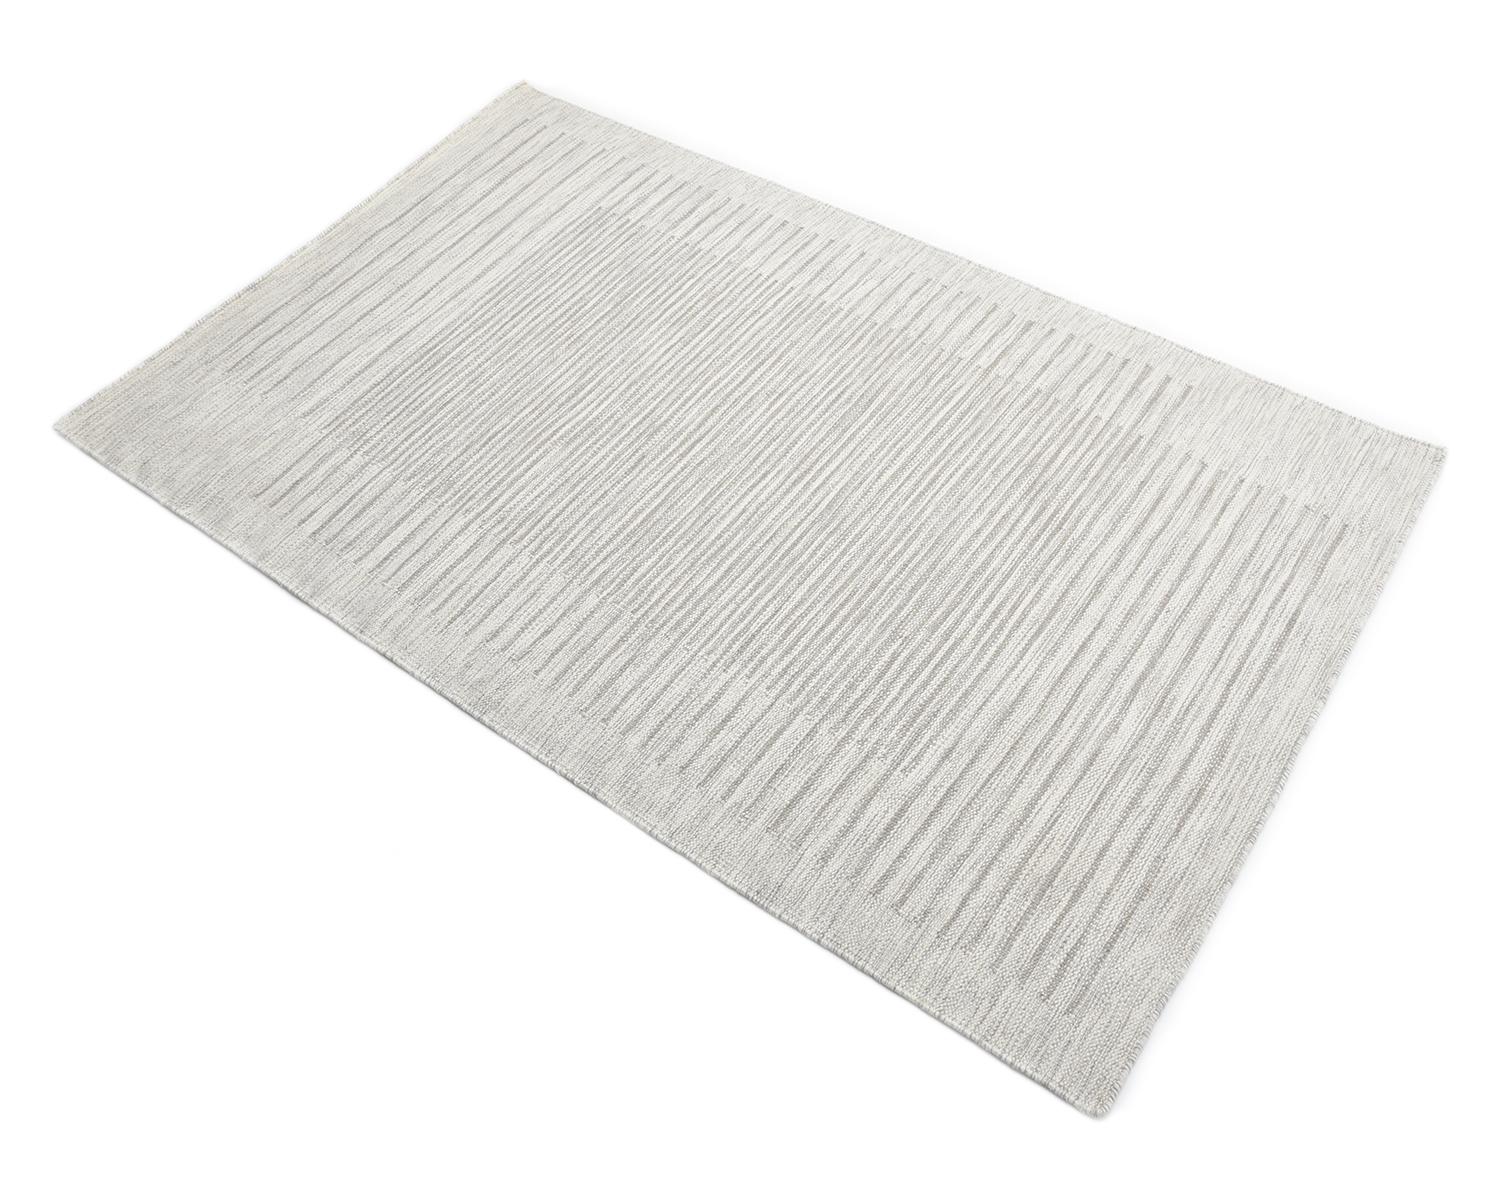 Solo Rugs Flatweave Striped Hand Woven Light Gray Area Rug For Sale 1